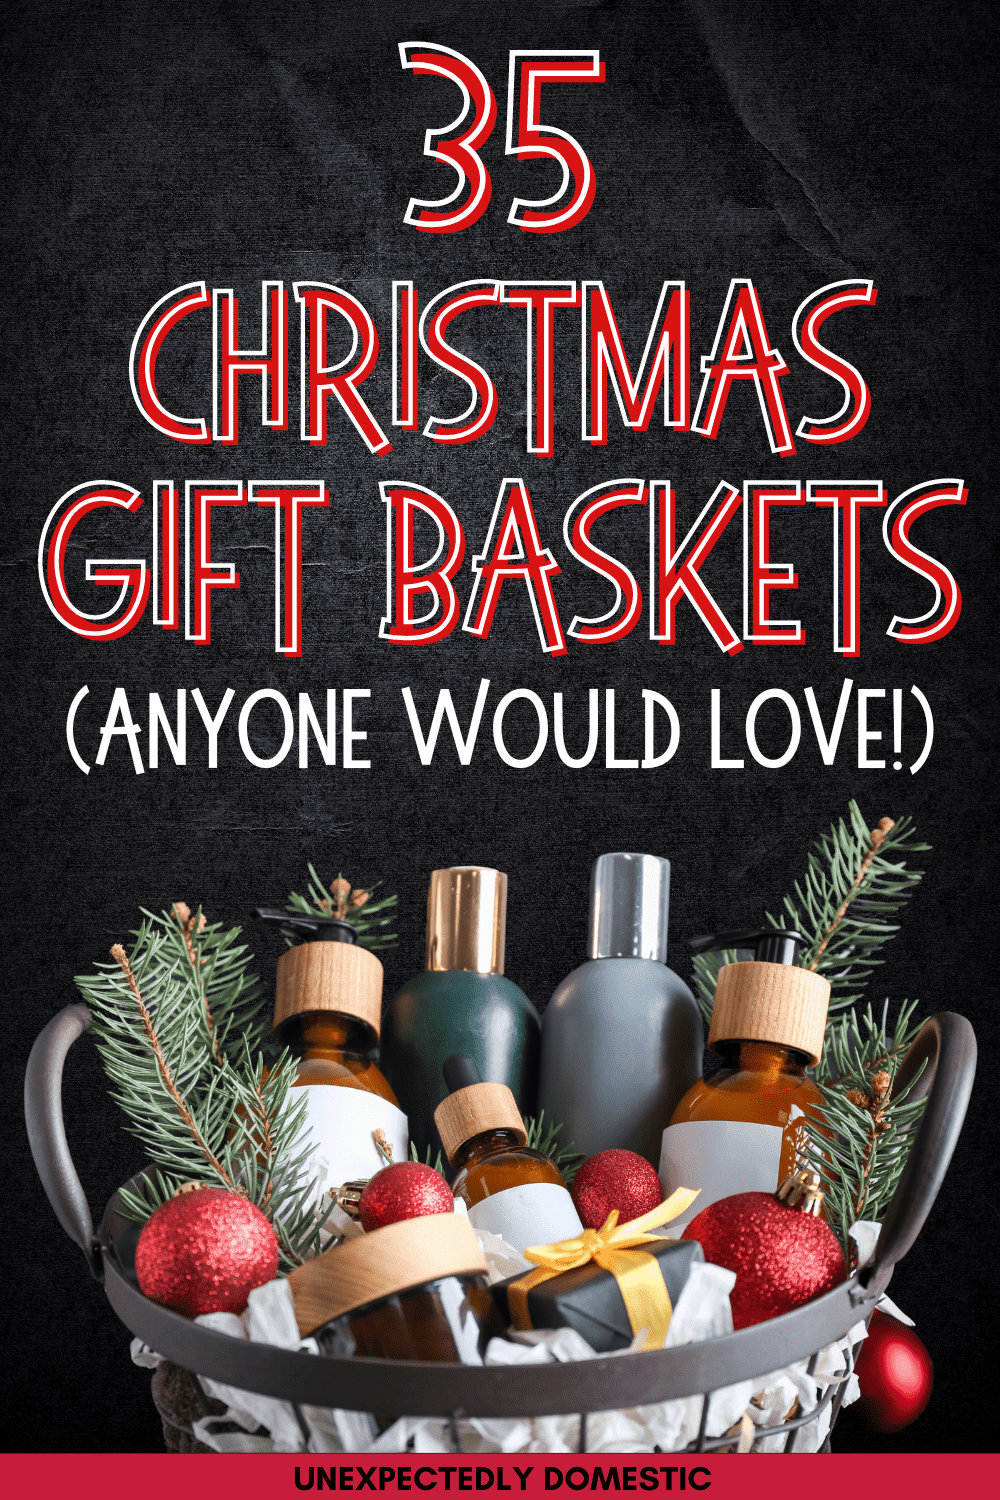 Christmas gift basket ideas! This list of things to put in a holiday gift basket will give you lots of ideas for easy and affordable presents for any occasion.